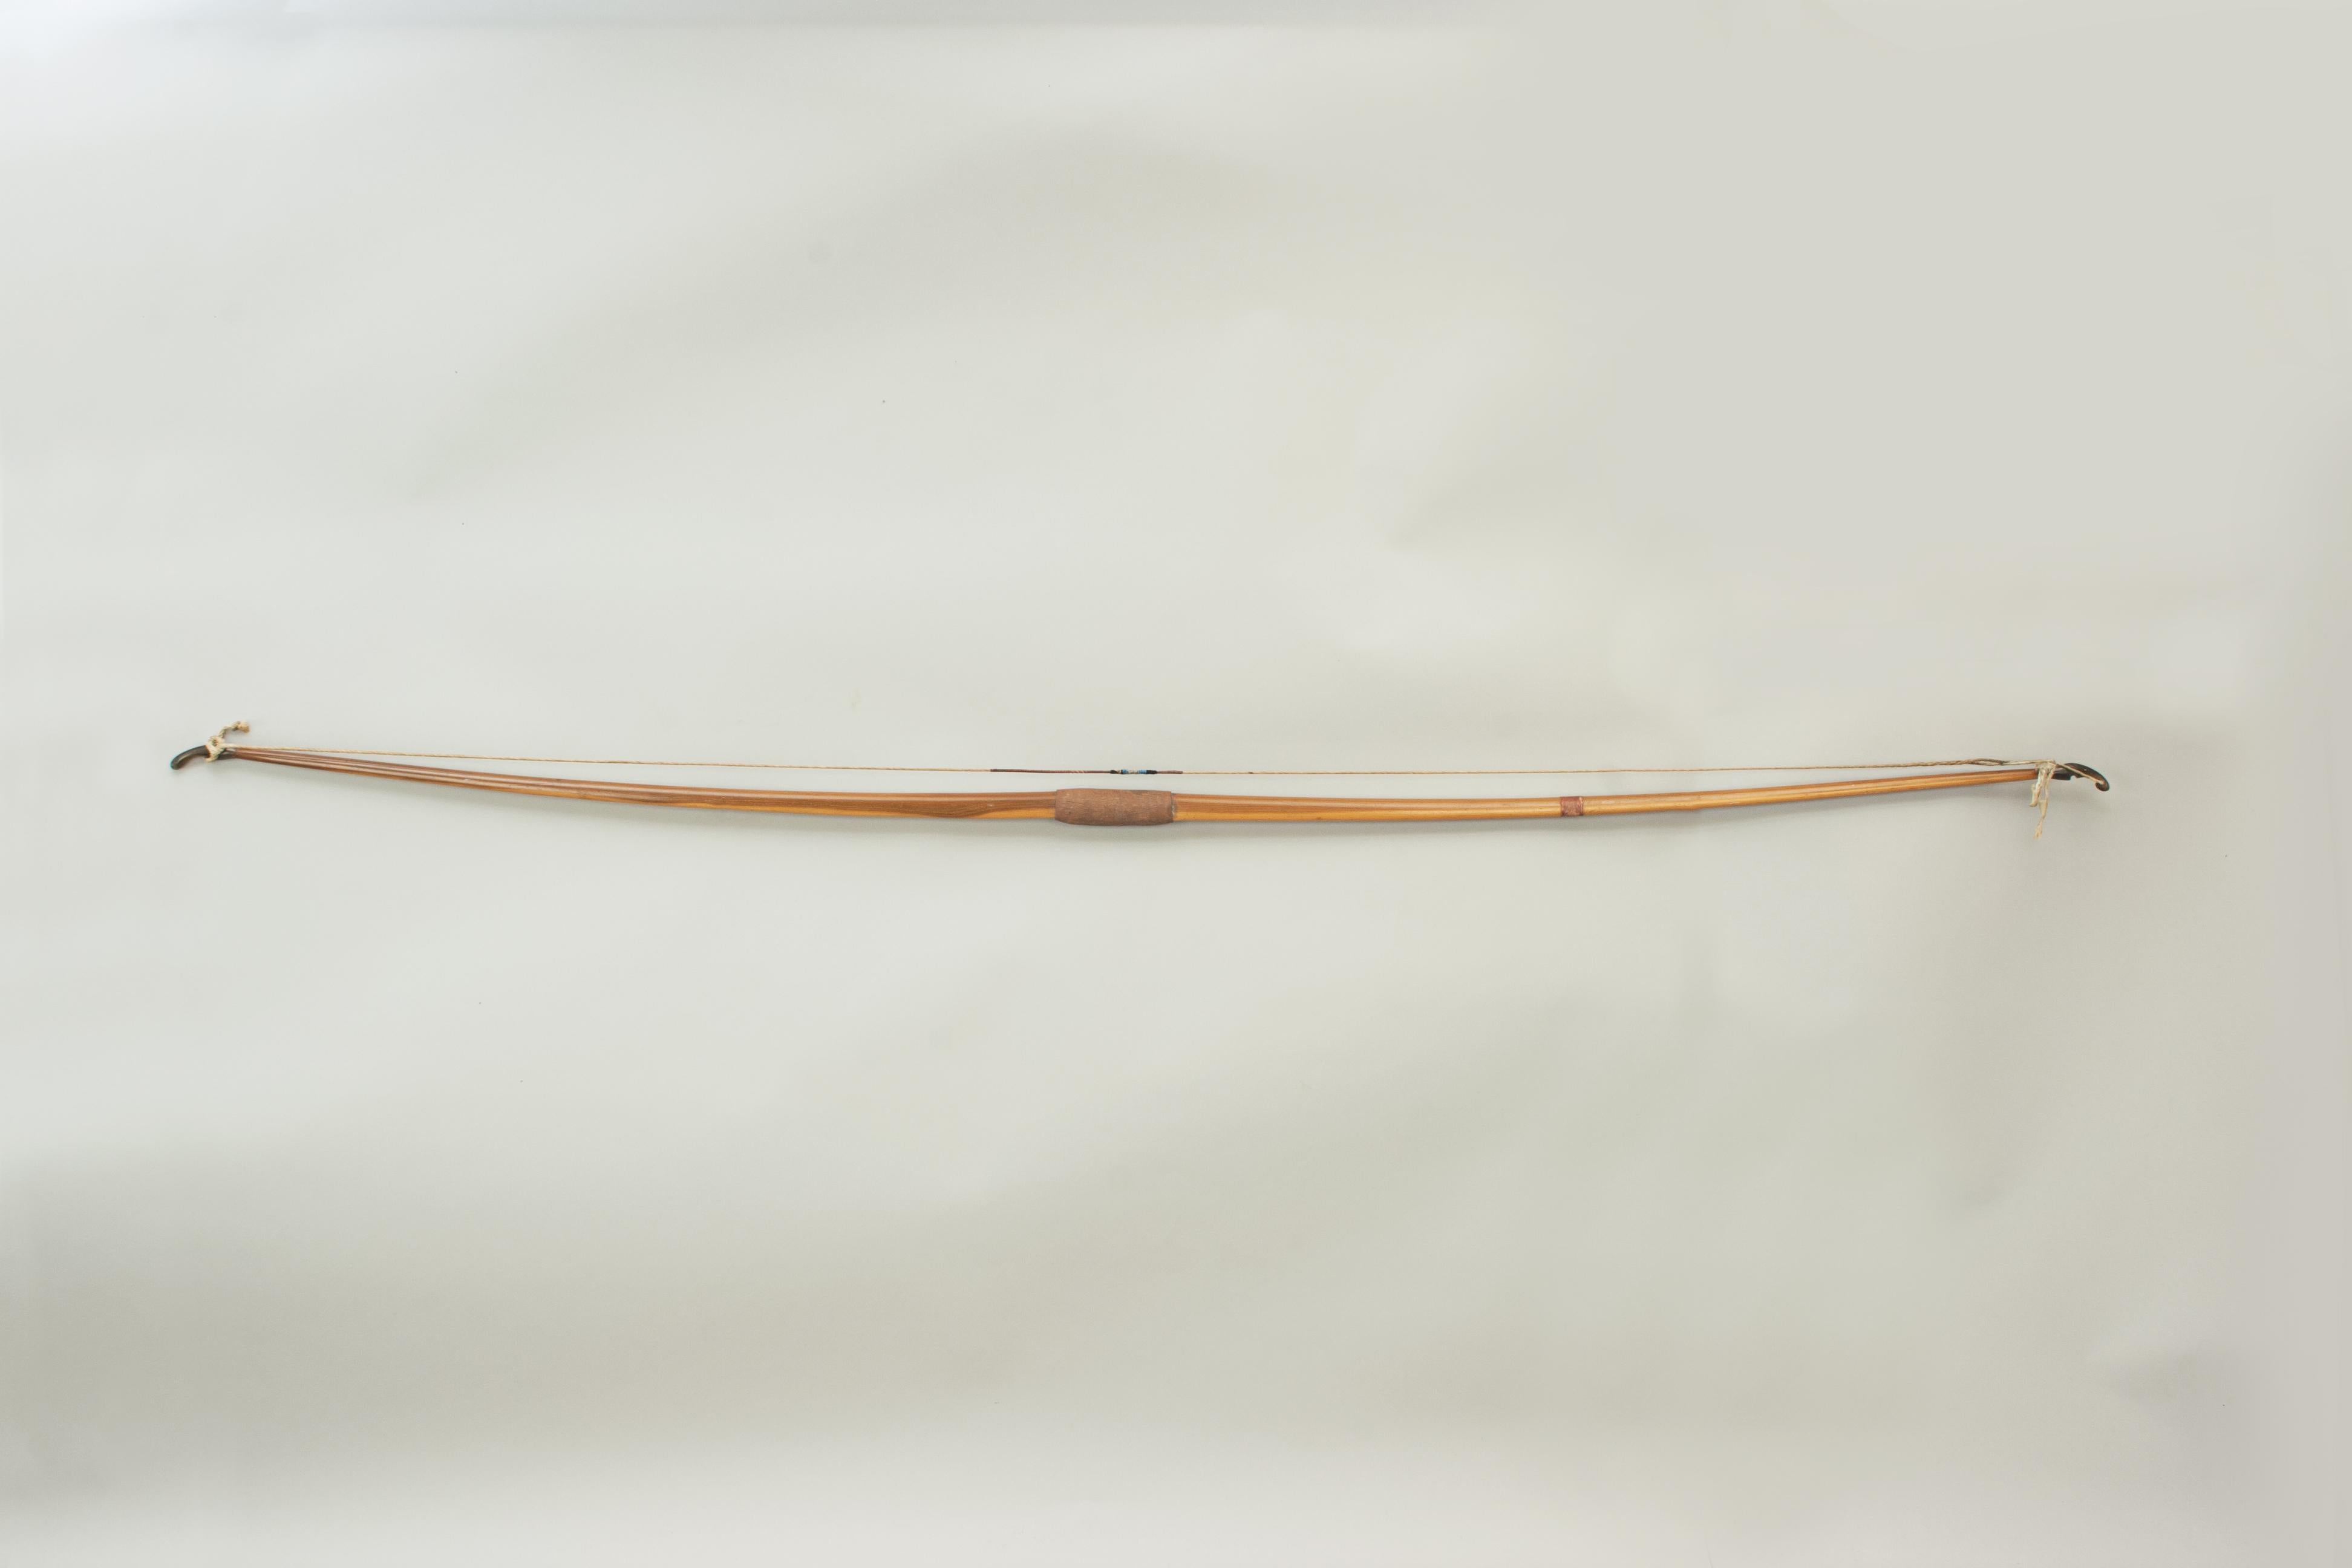 Vintage yew wood archery long bow by Thomas Aldred. A very good yew wood archery bow produced by the workshops of Thomas Aldred, London, which operated from 1846-1918. The bow is fitted with horn nocks and a rubber handle grip. Just above the grip